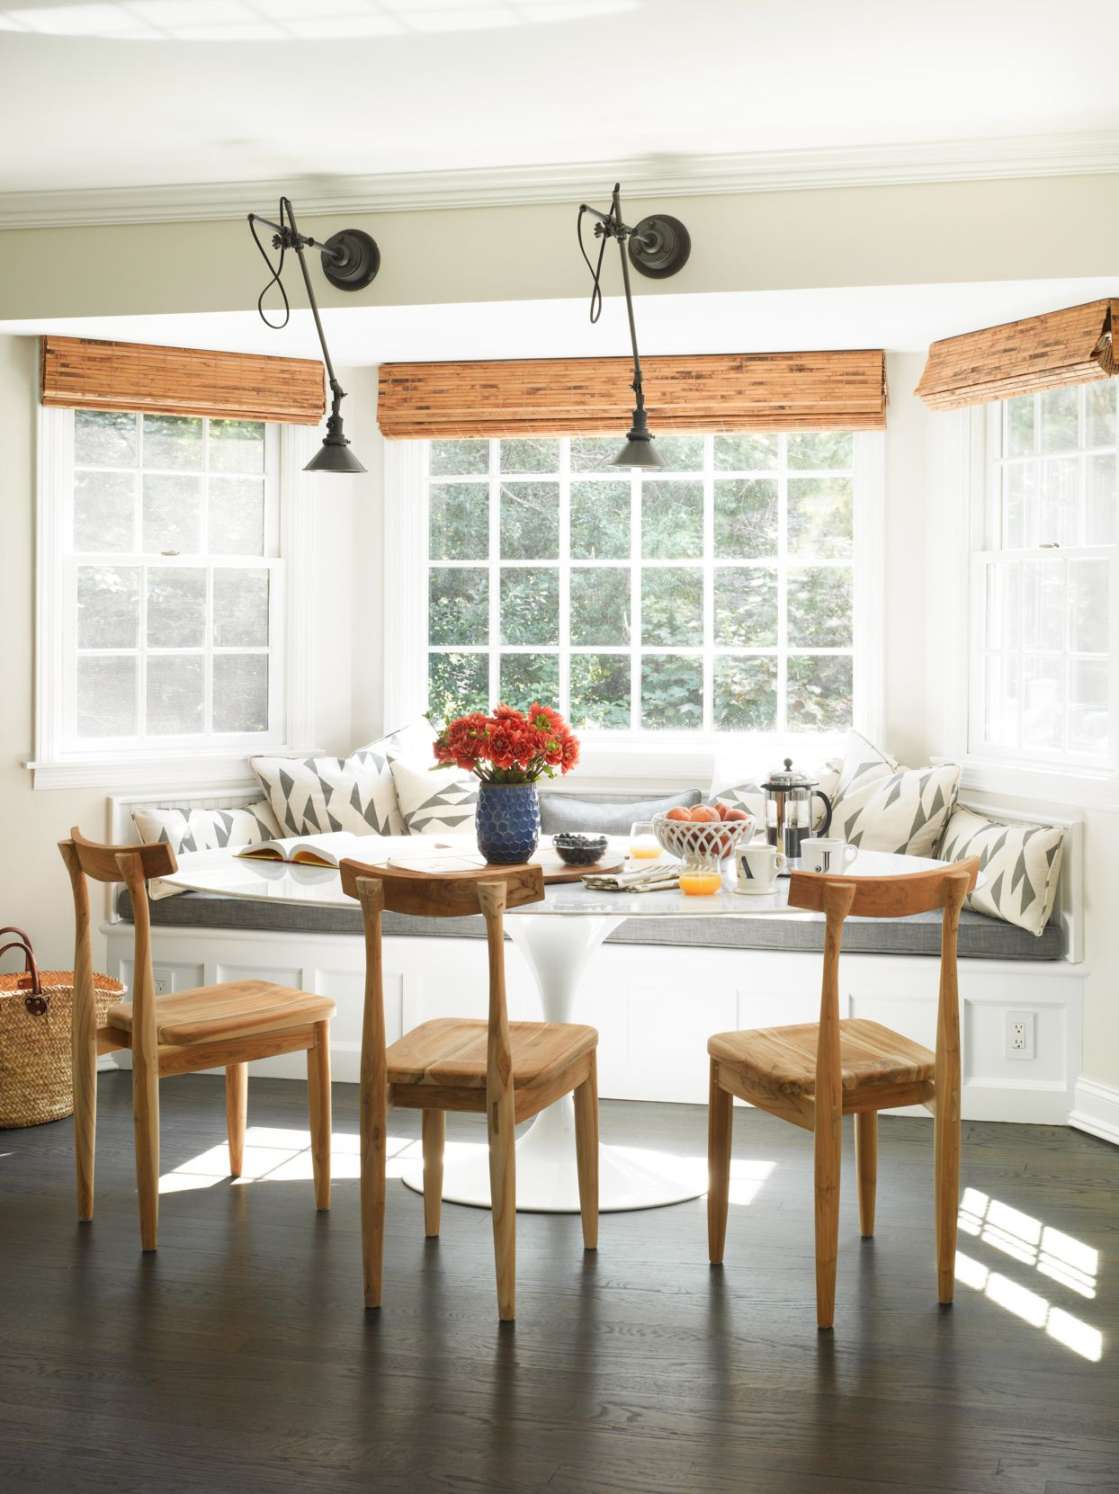 Window Design Ideas for a Bright, Picturesque Space